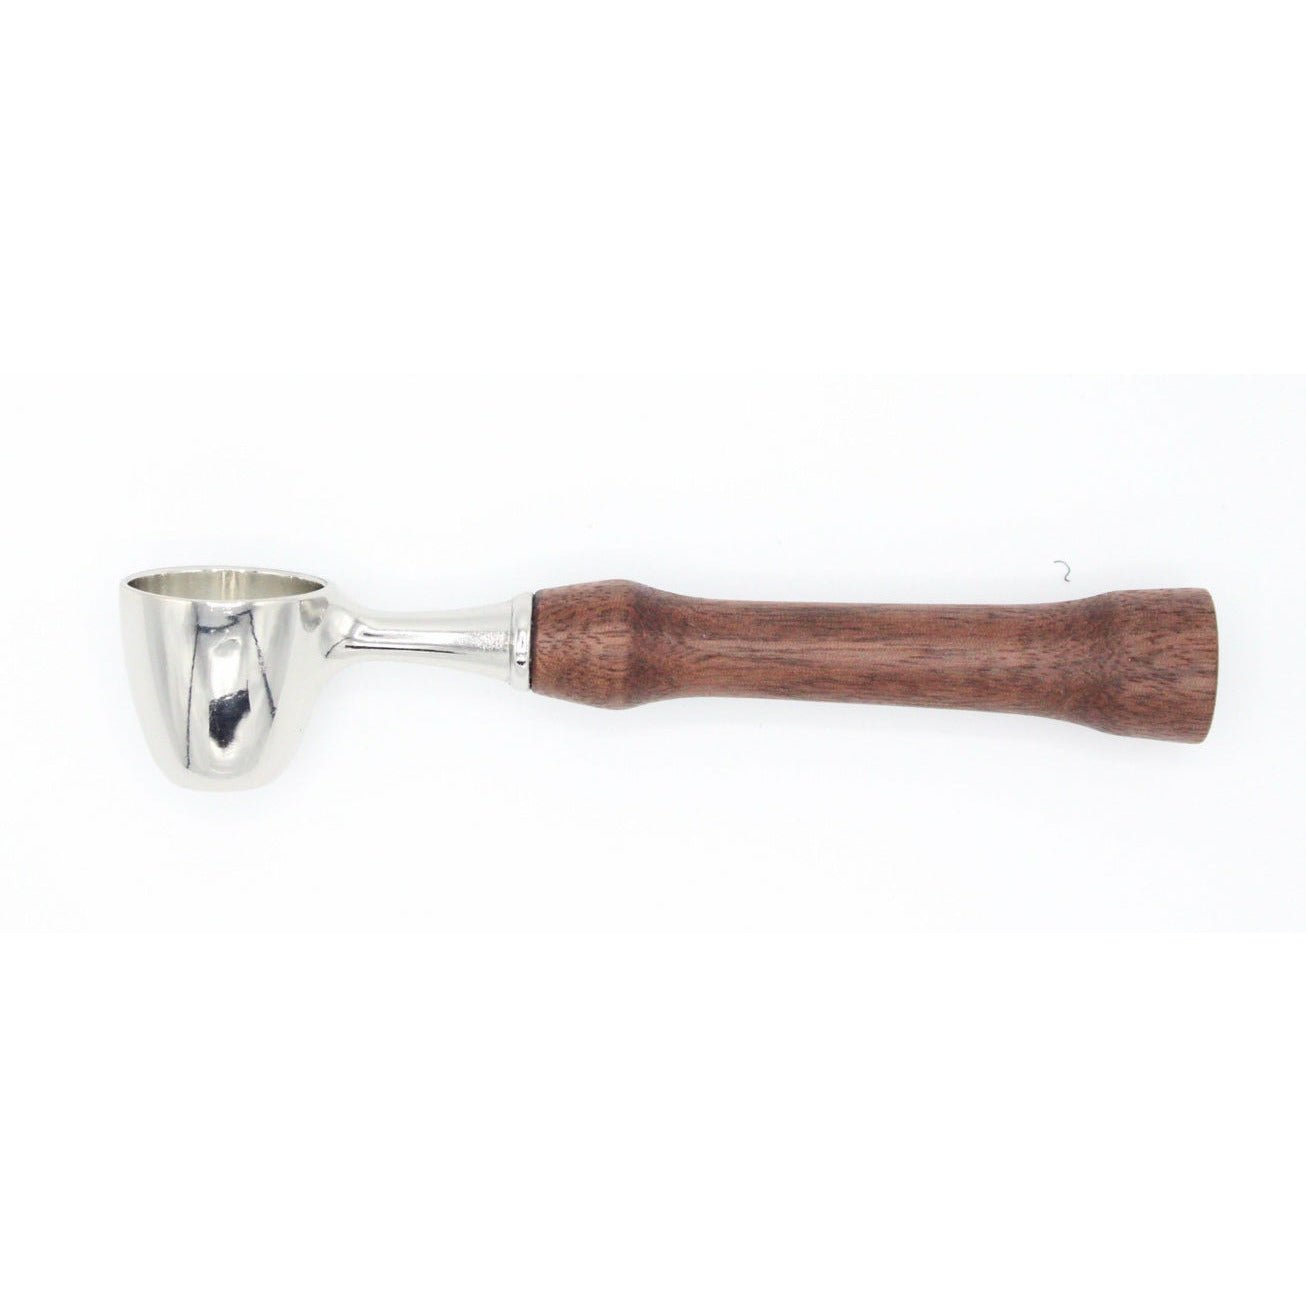 Premium Coffee Scoop - Clines Crafted Woodworking LLC